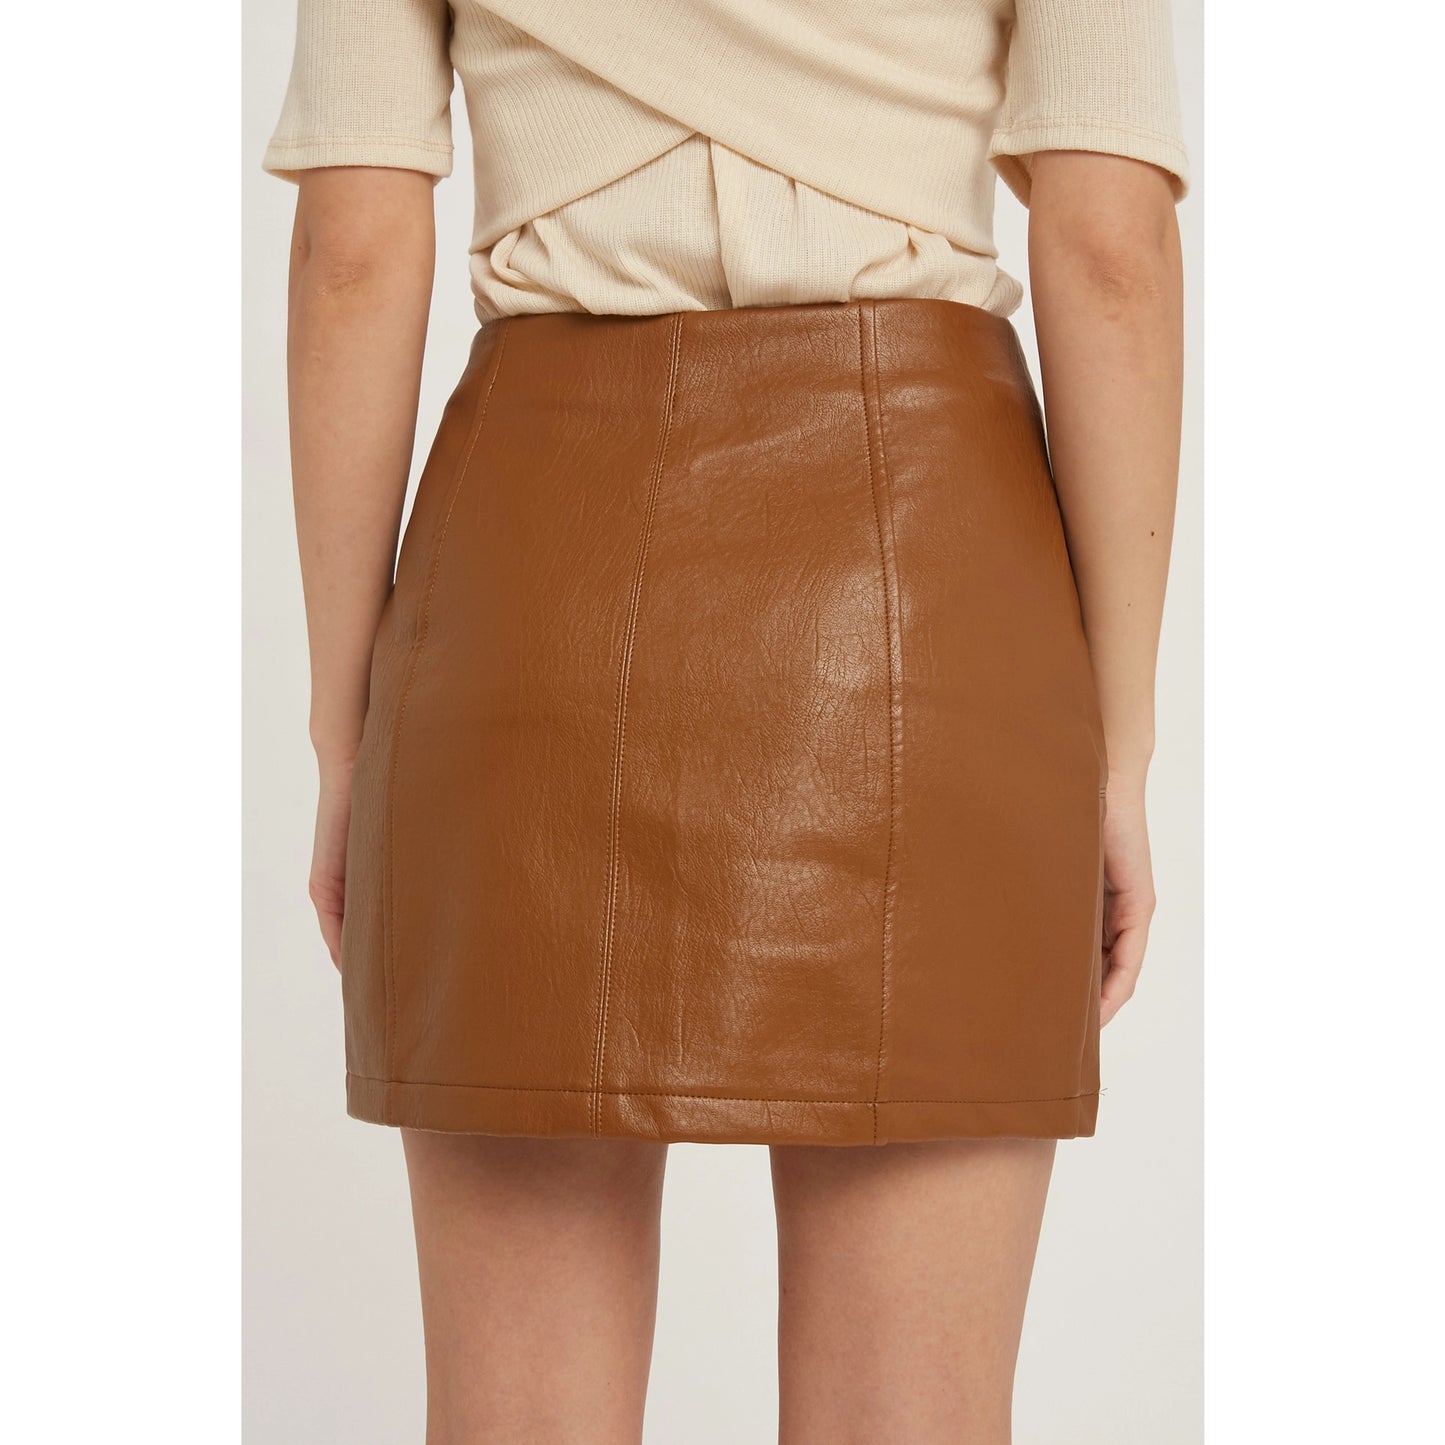 The Faux Leather Mini Skirt - Milly's Boutique